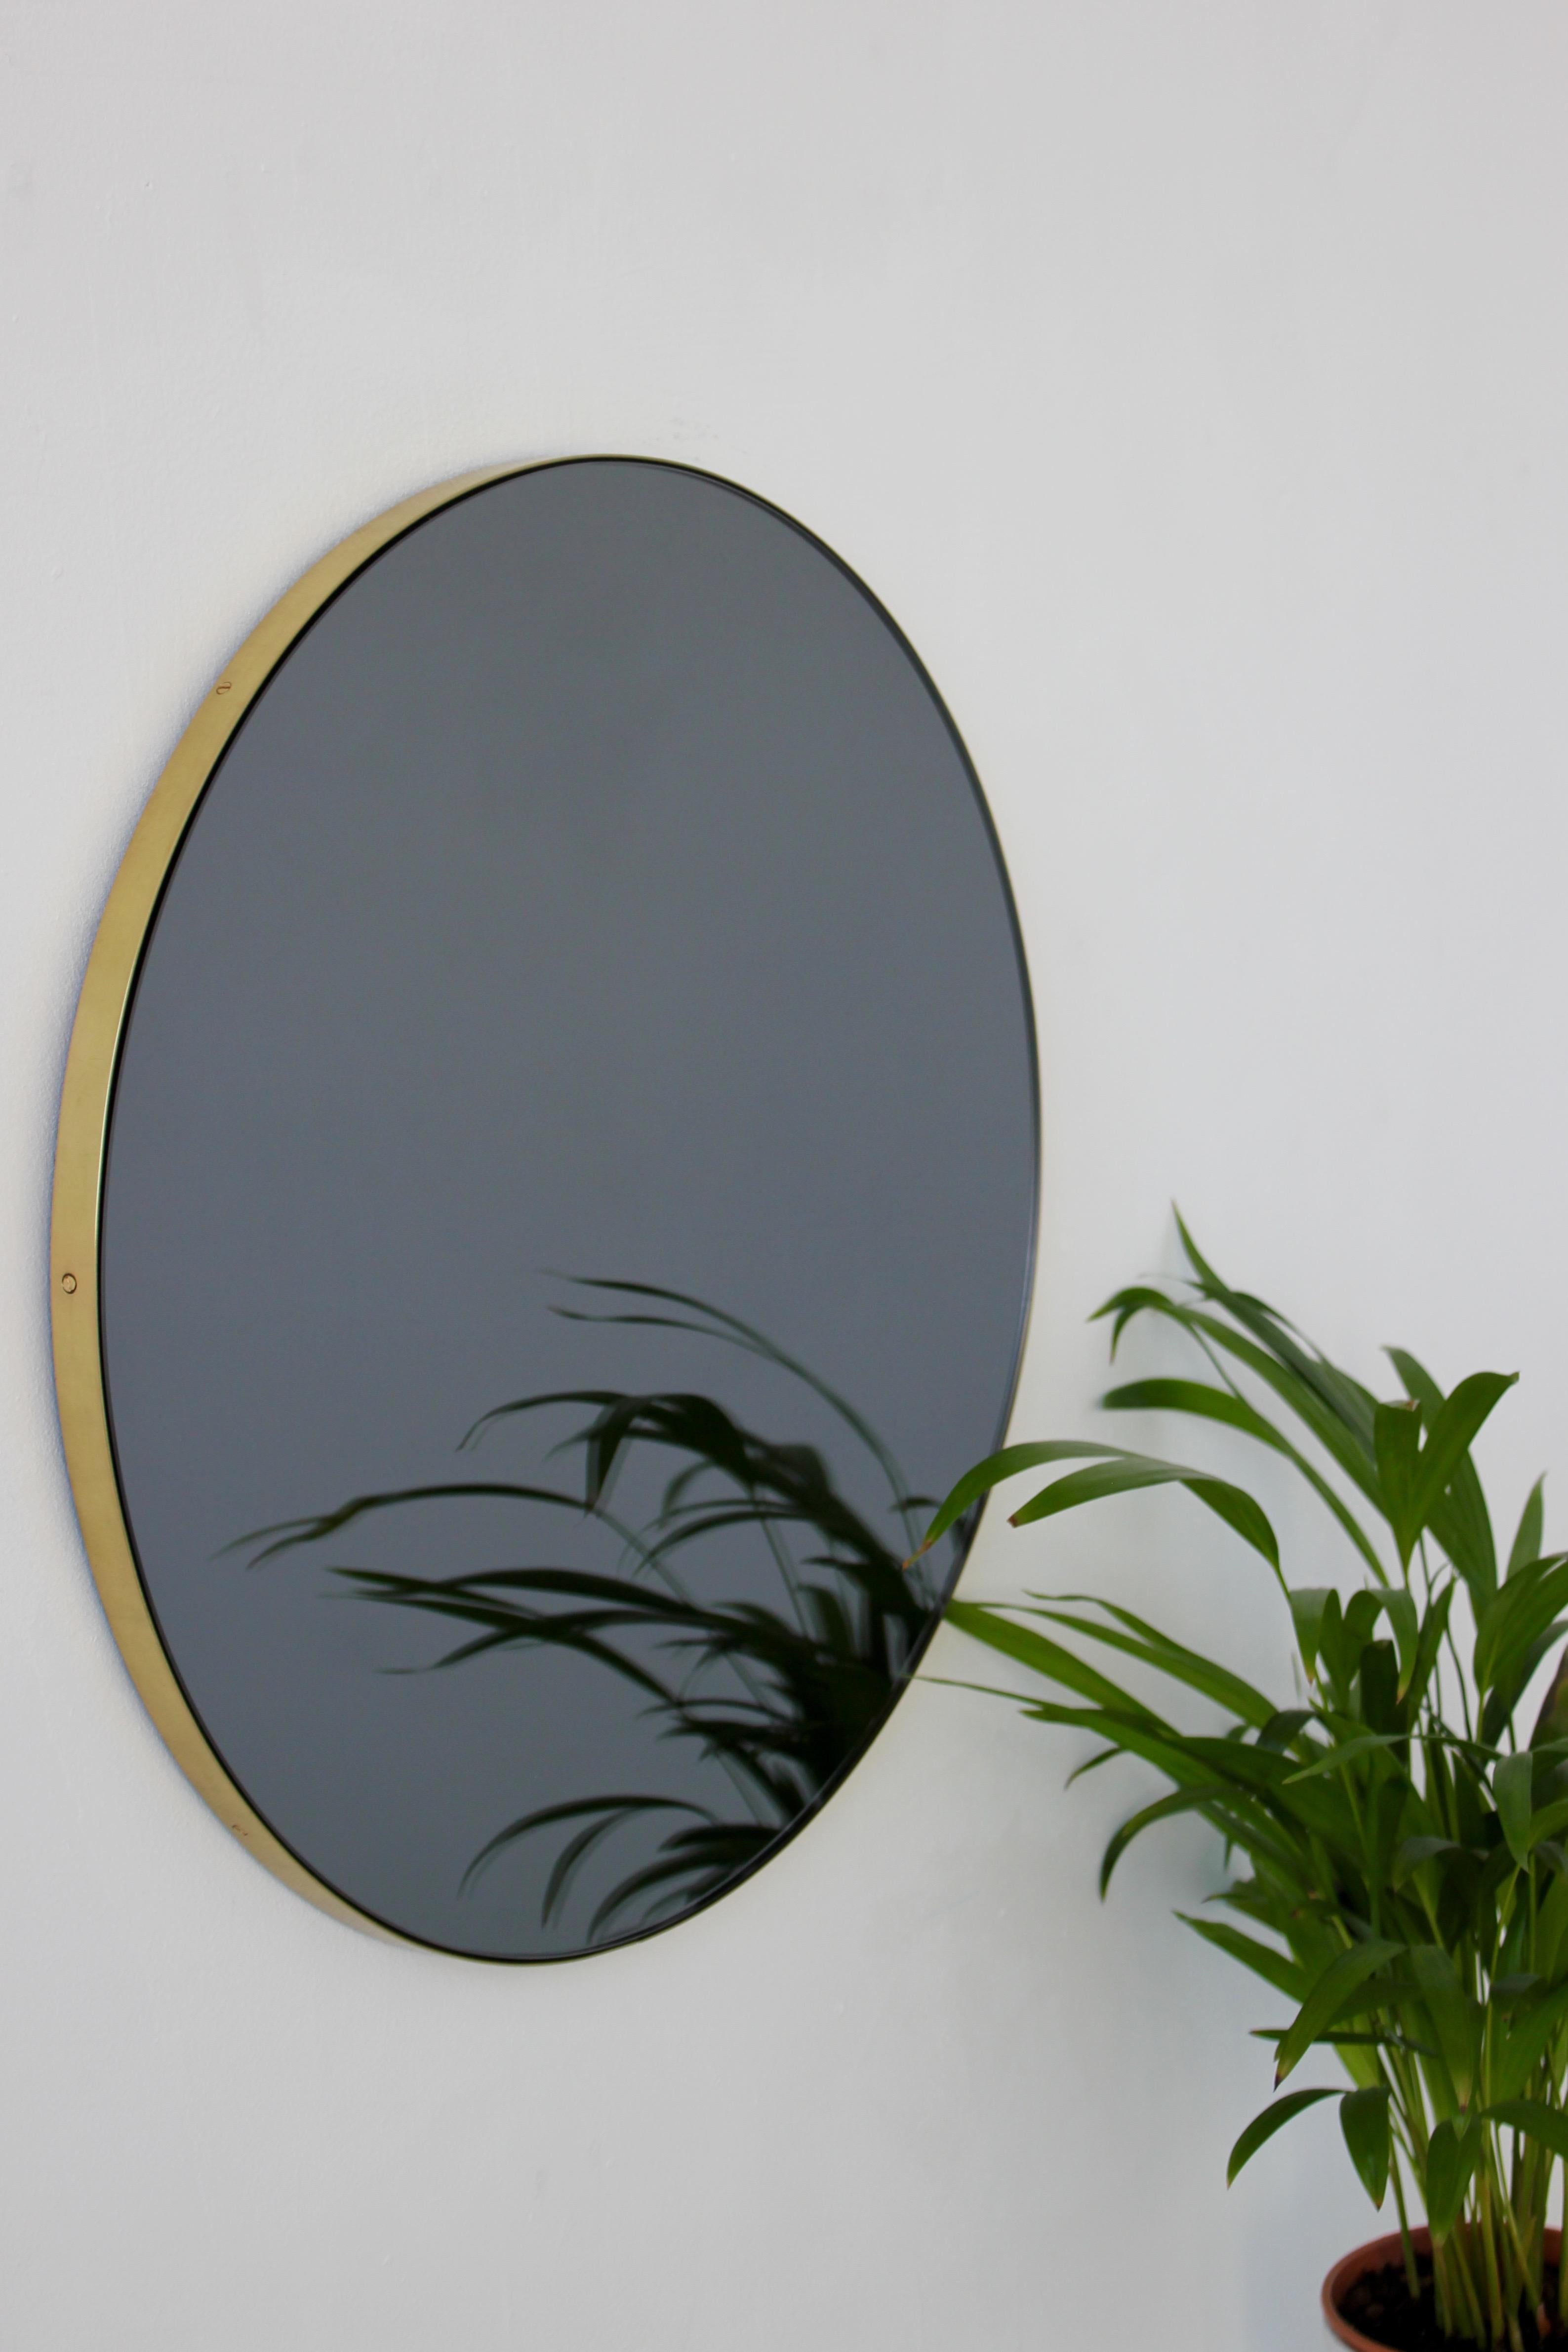 Minimalist black tinted round mirror with an elegant brushed brass frame. The detailing and finish, including visible brass screws, emphasize the crafty and quality feel of the mirror, a true signature of our brand. Designed and handcrafted in